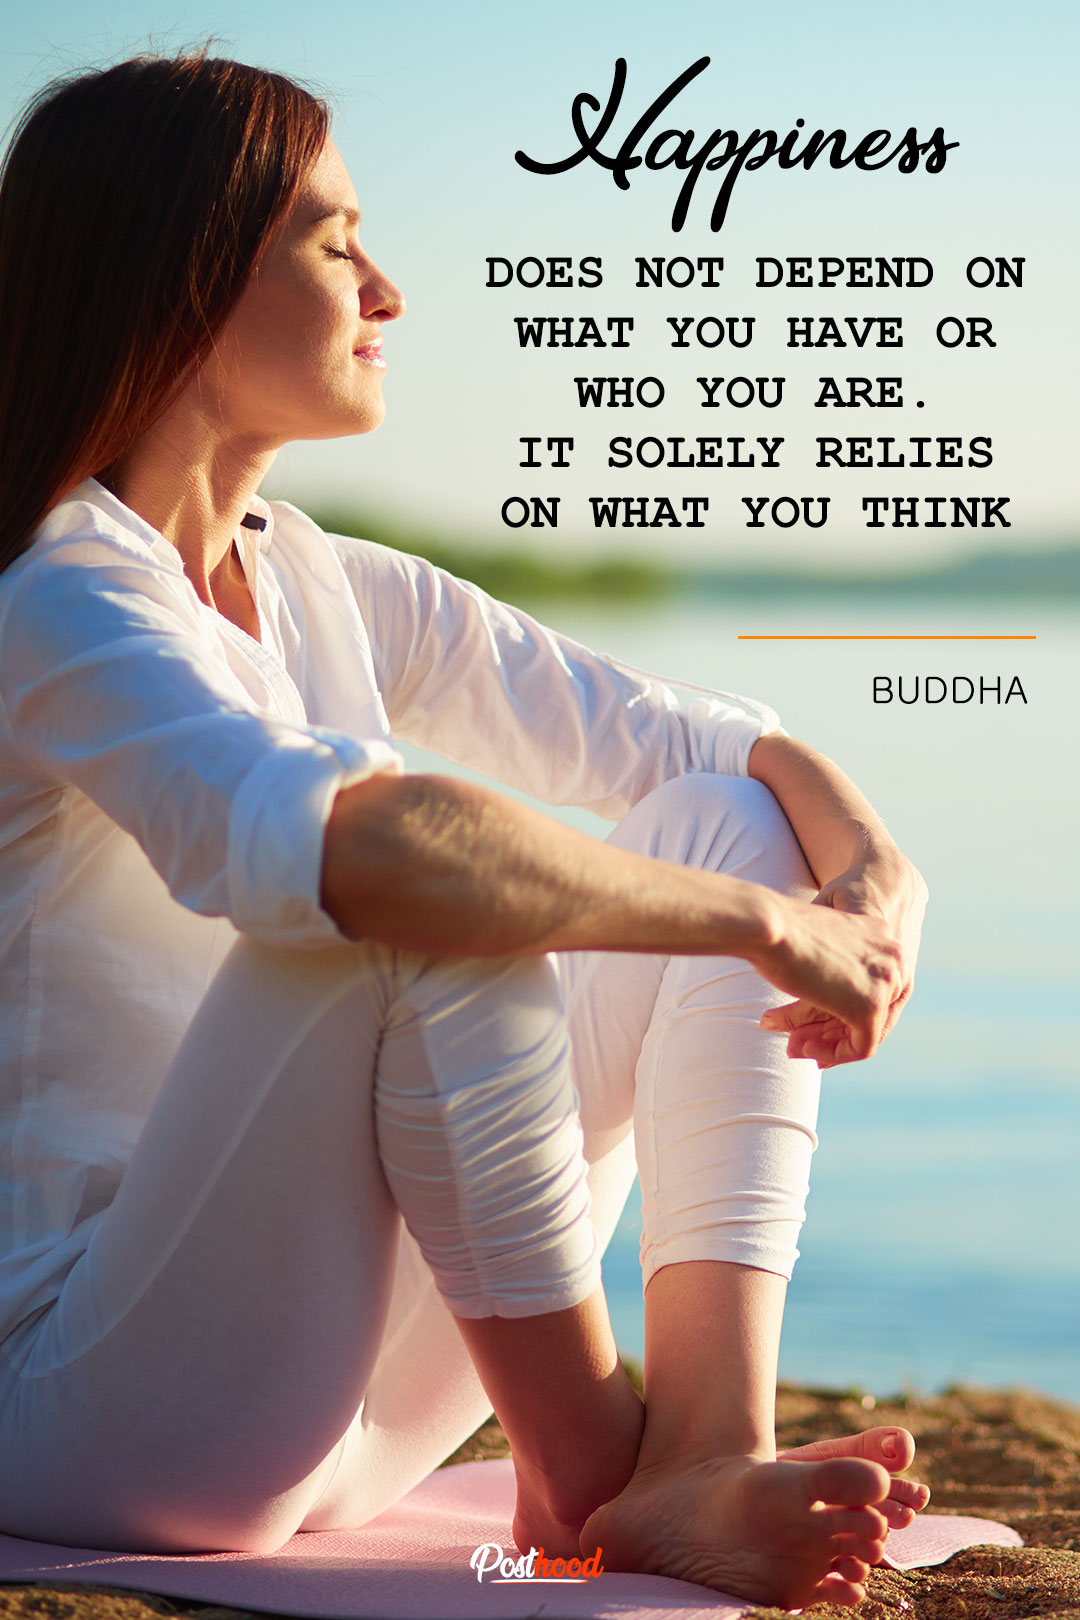 Find powerful Buddha quotes on love, peace and happiness. Learn the art of living through Buddha teachings.